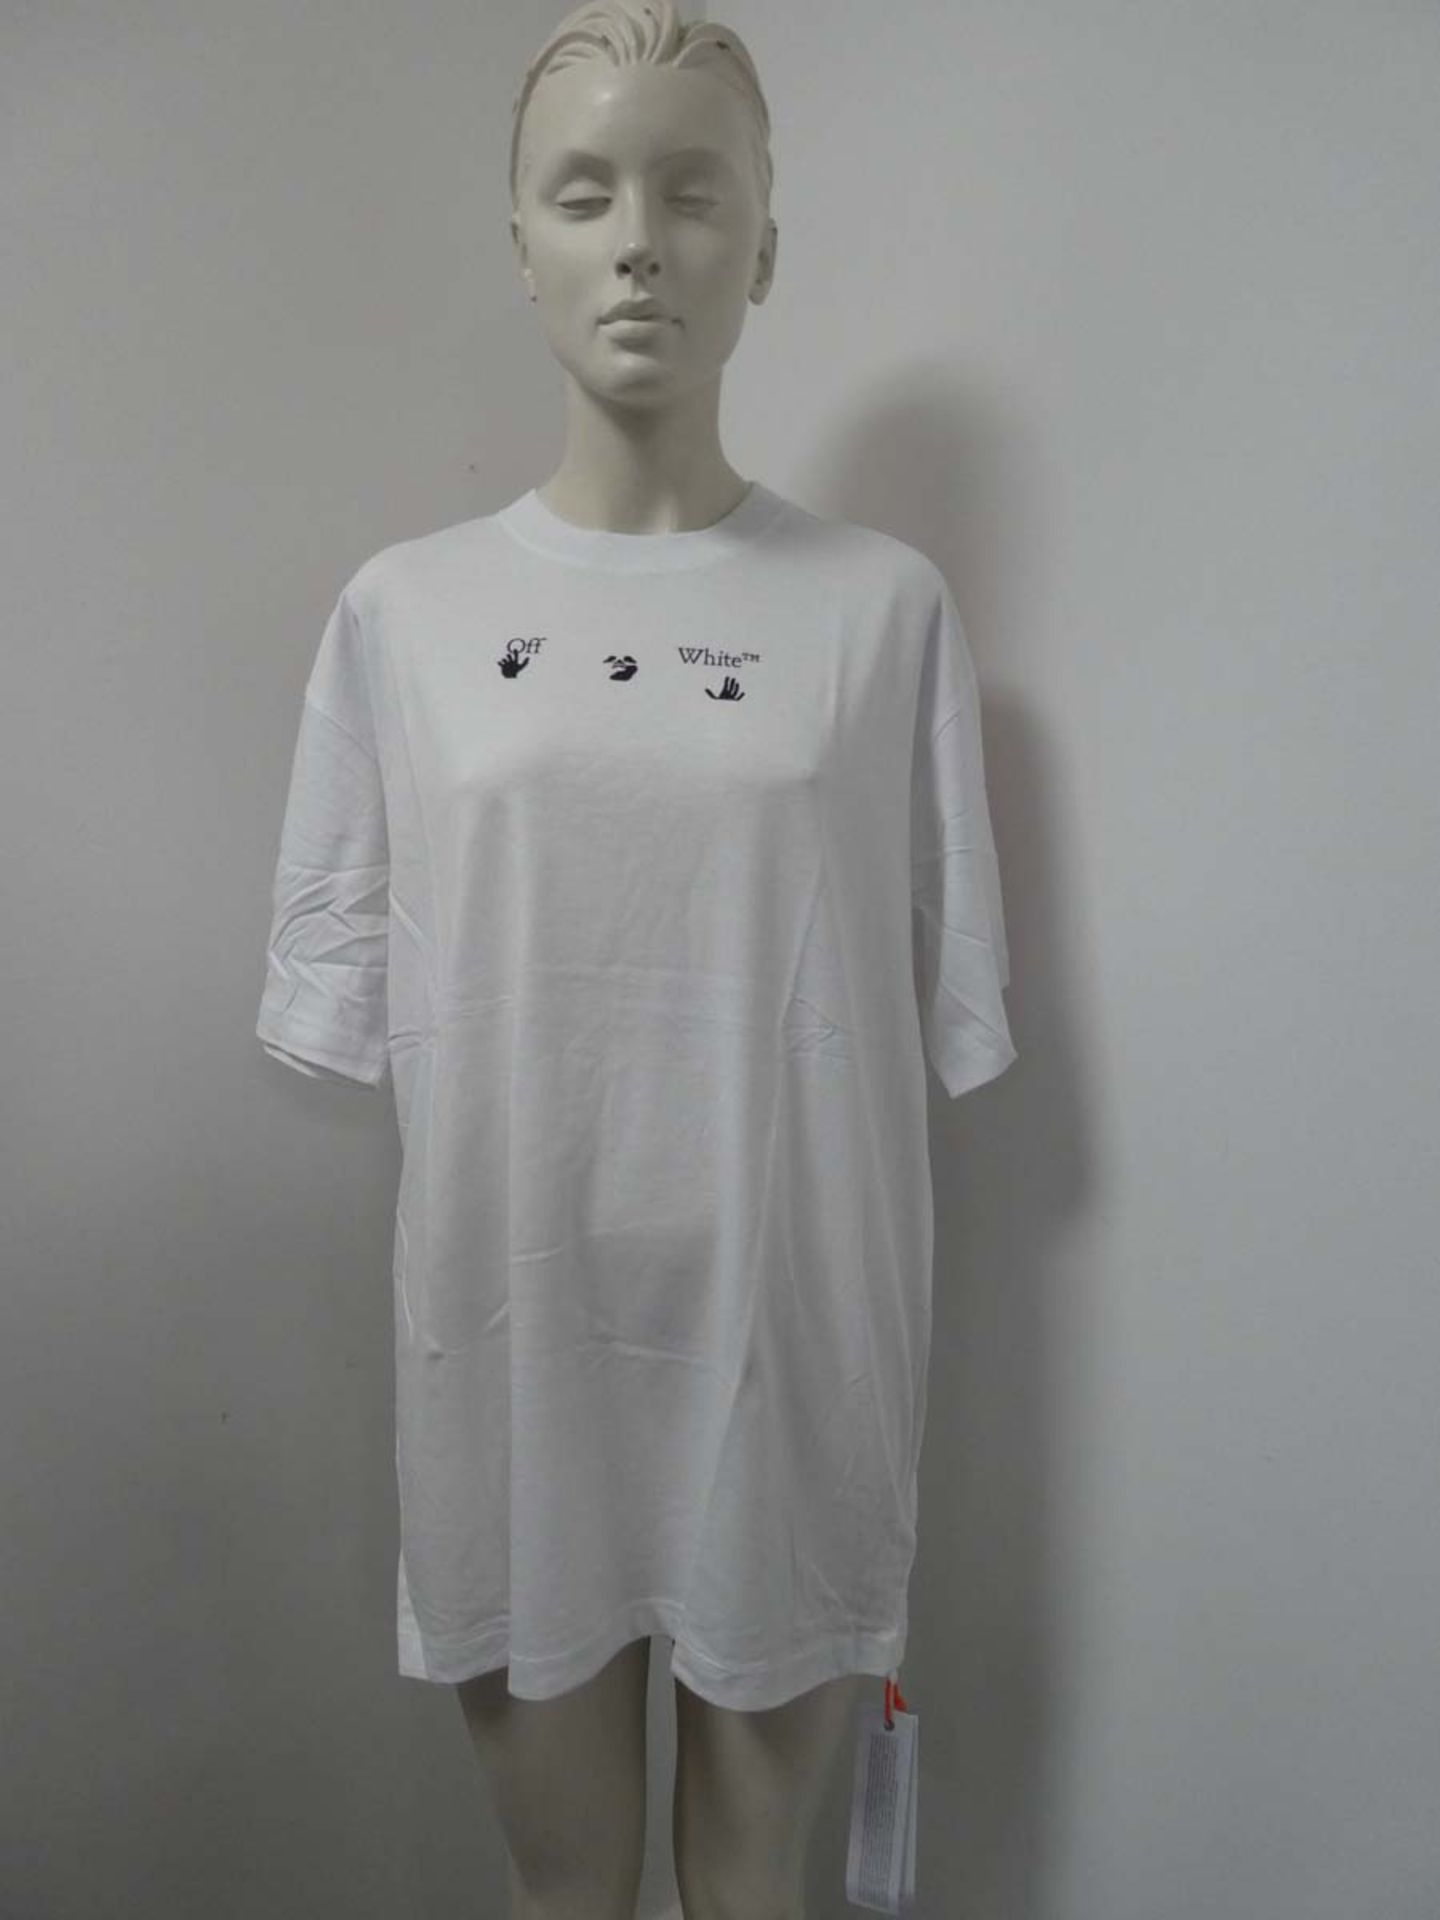 Off White marker short sleeved t-shirt in white / red size medium (bagged) - Image 2 of 3